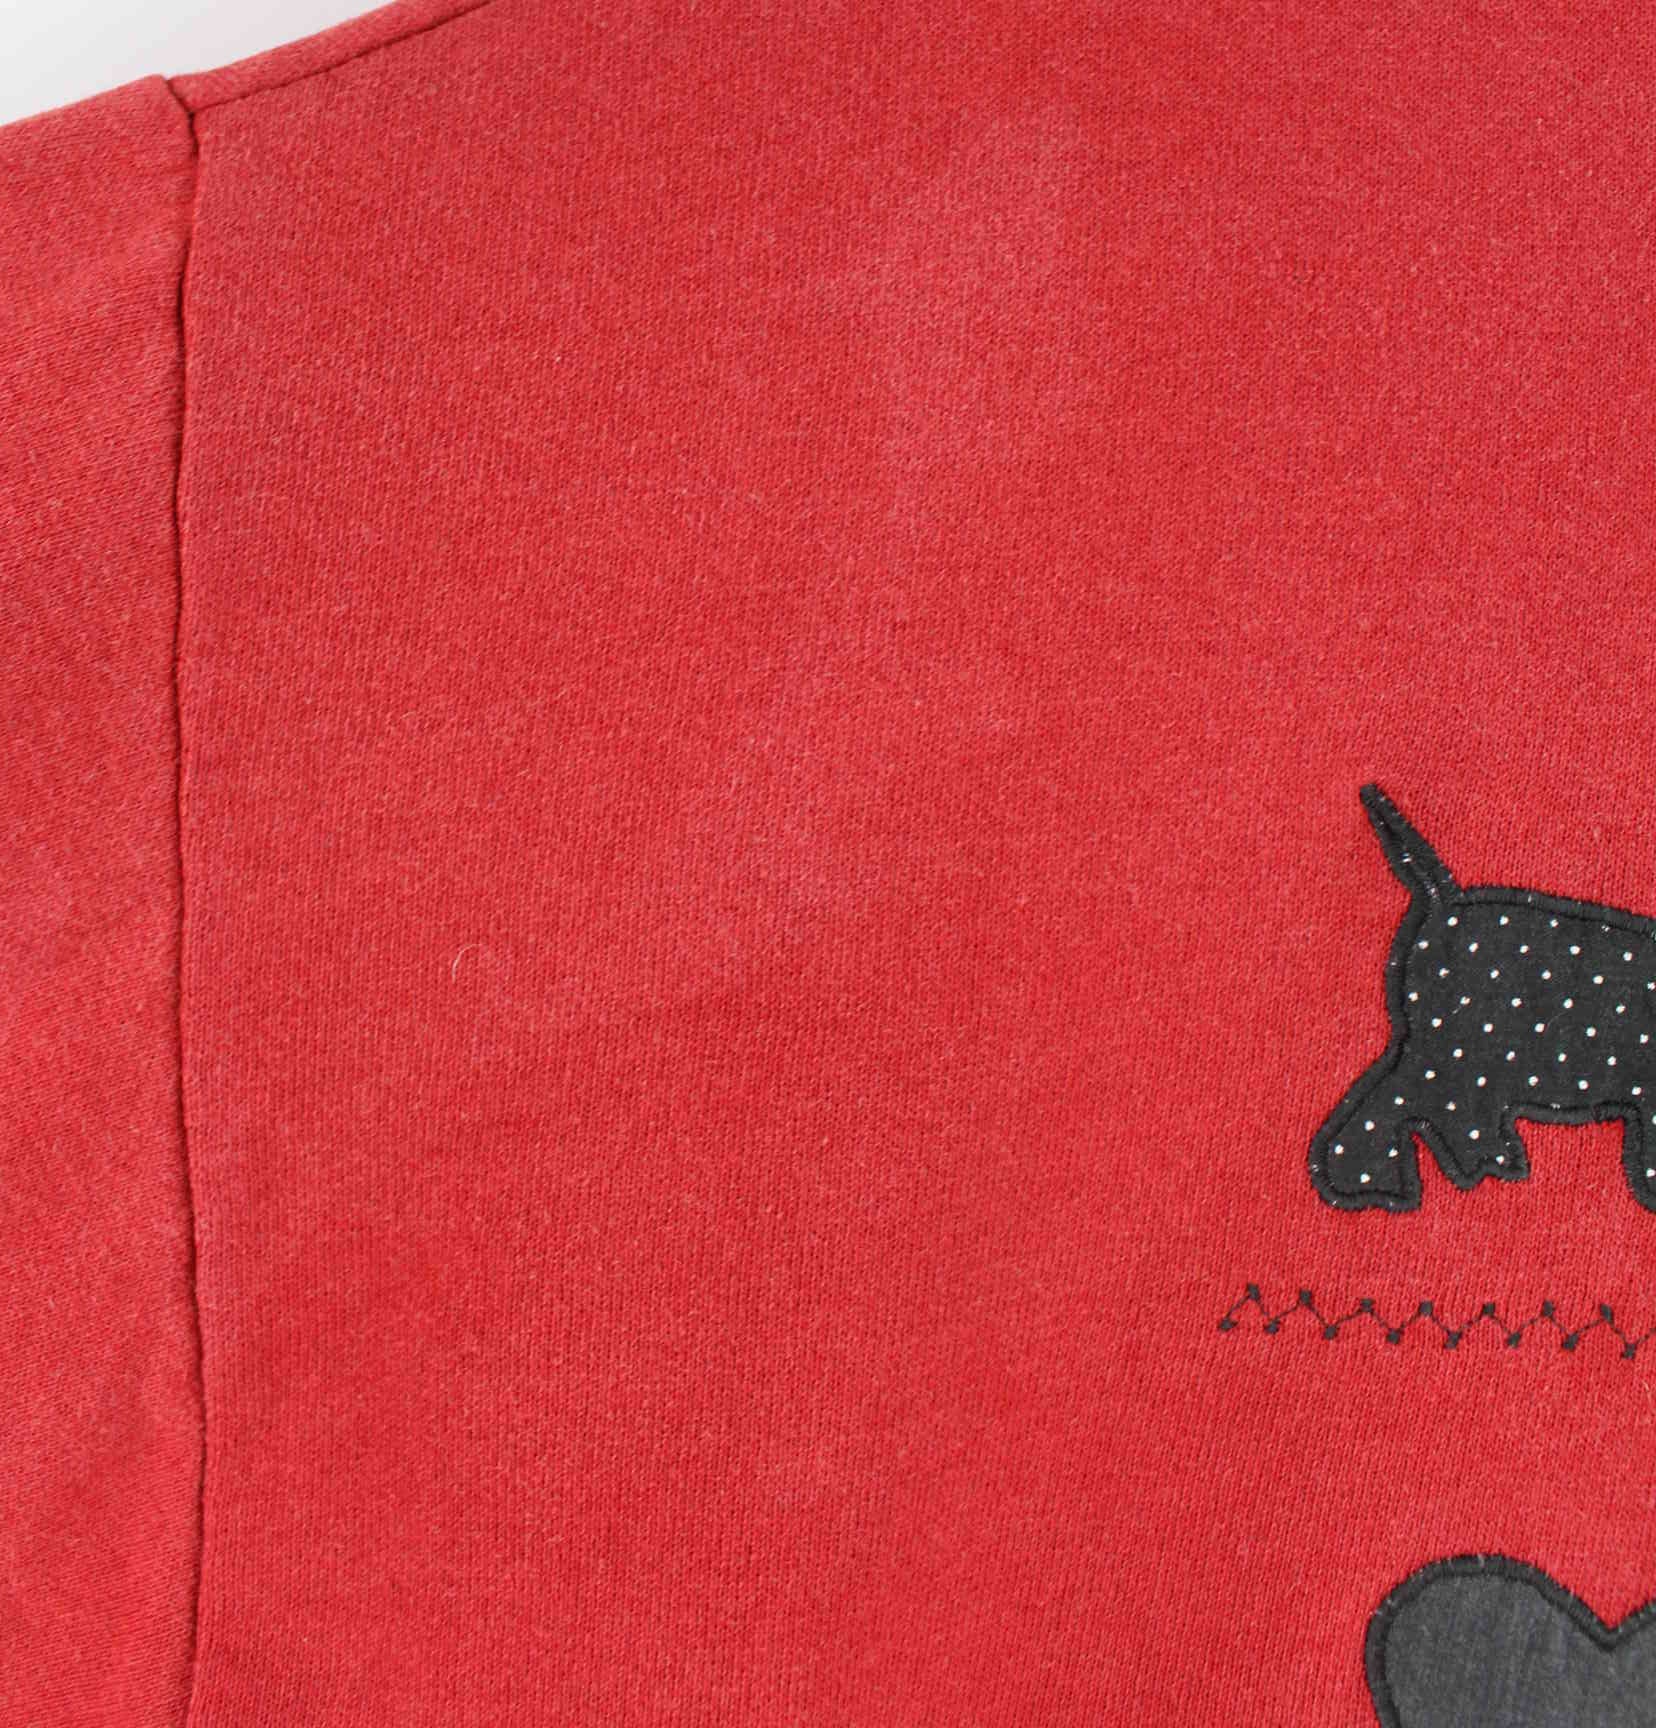 Jerzees 90s Vintage Dog Embroidered Sweater Rot XL (detail image 3)